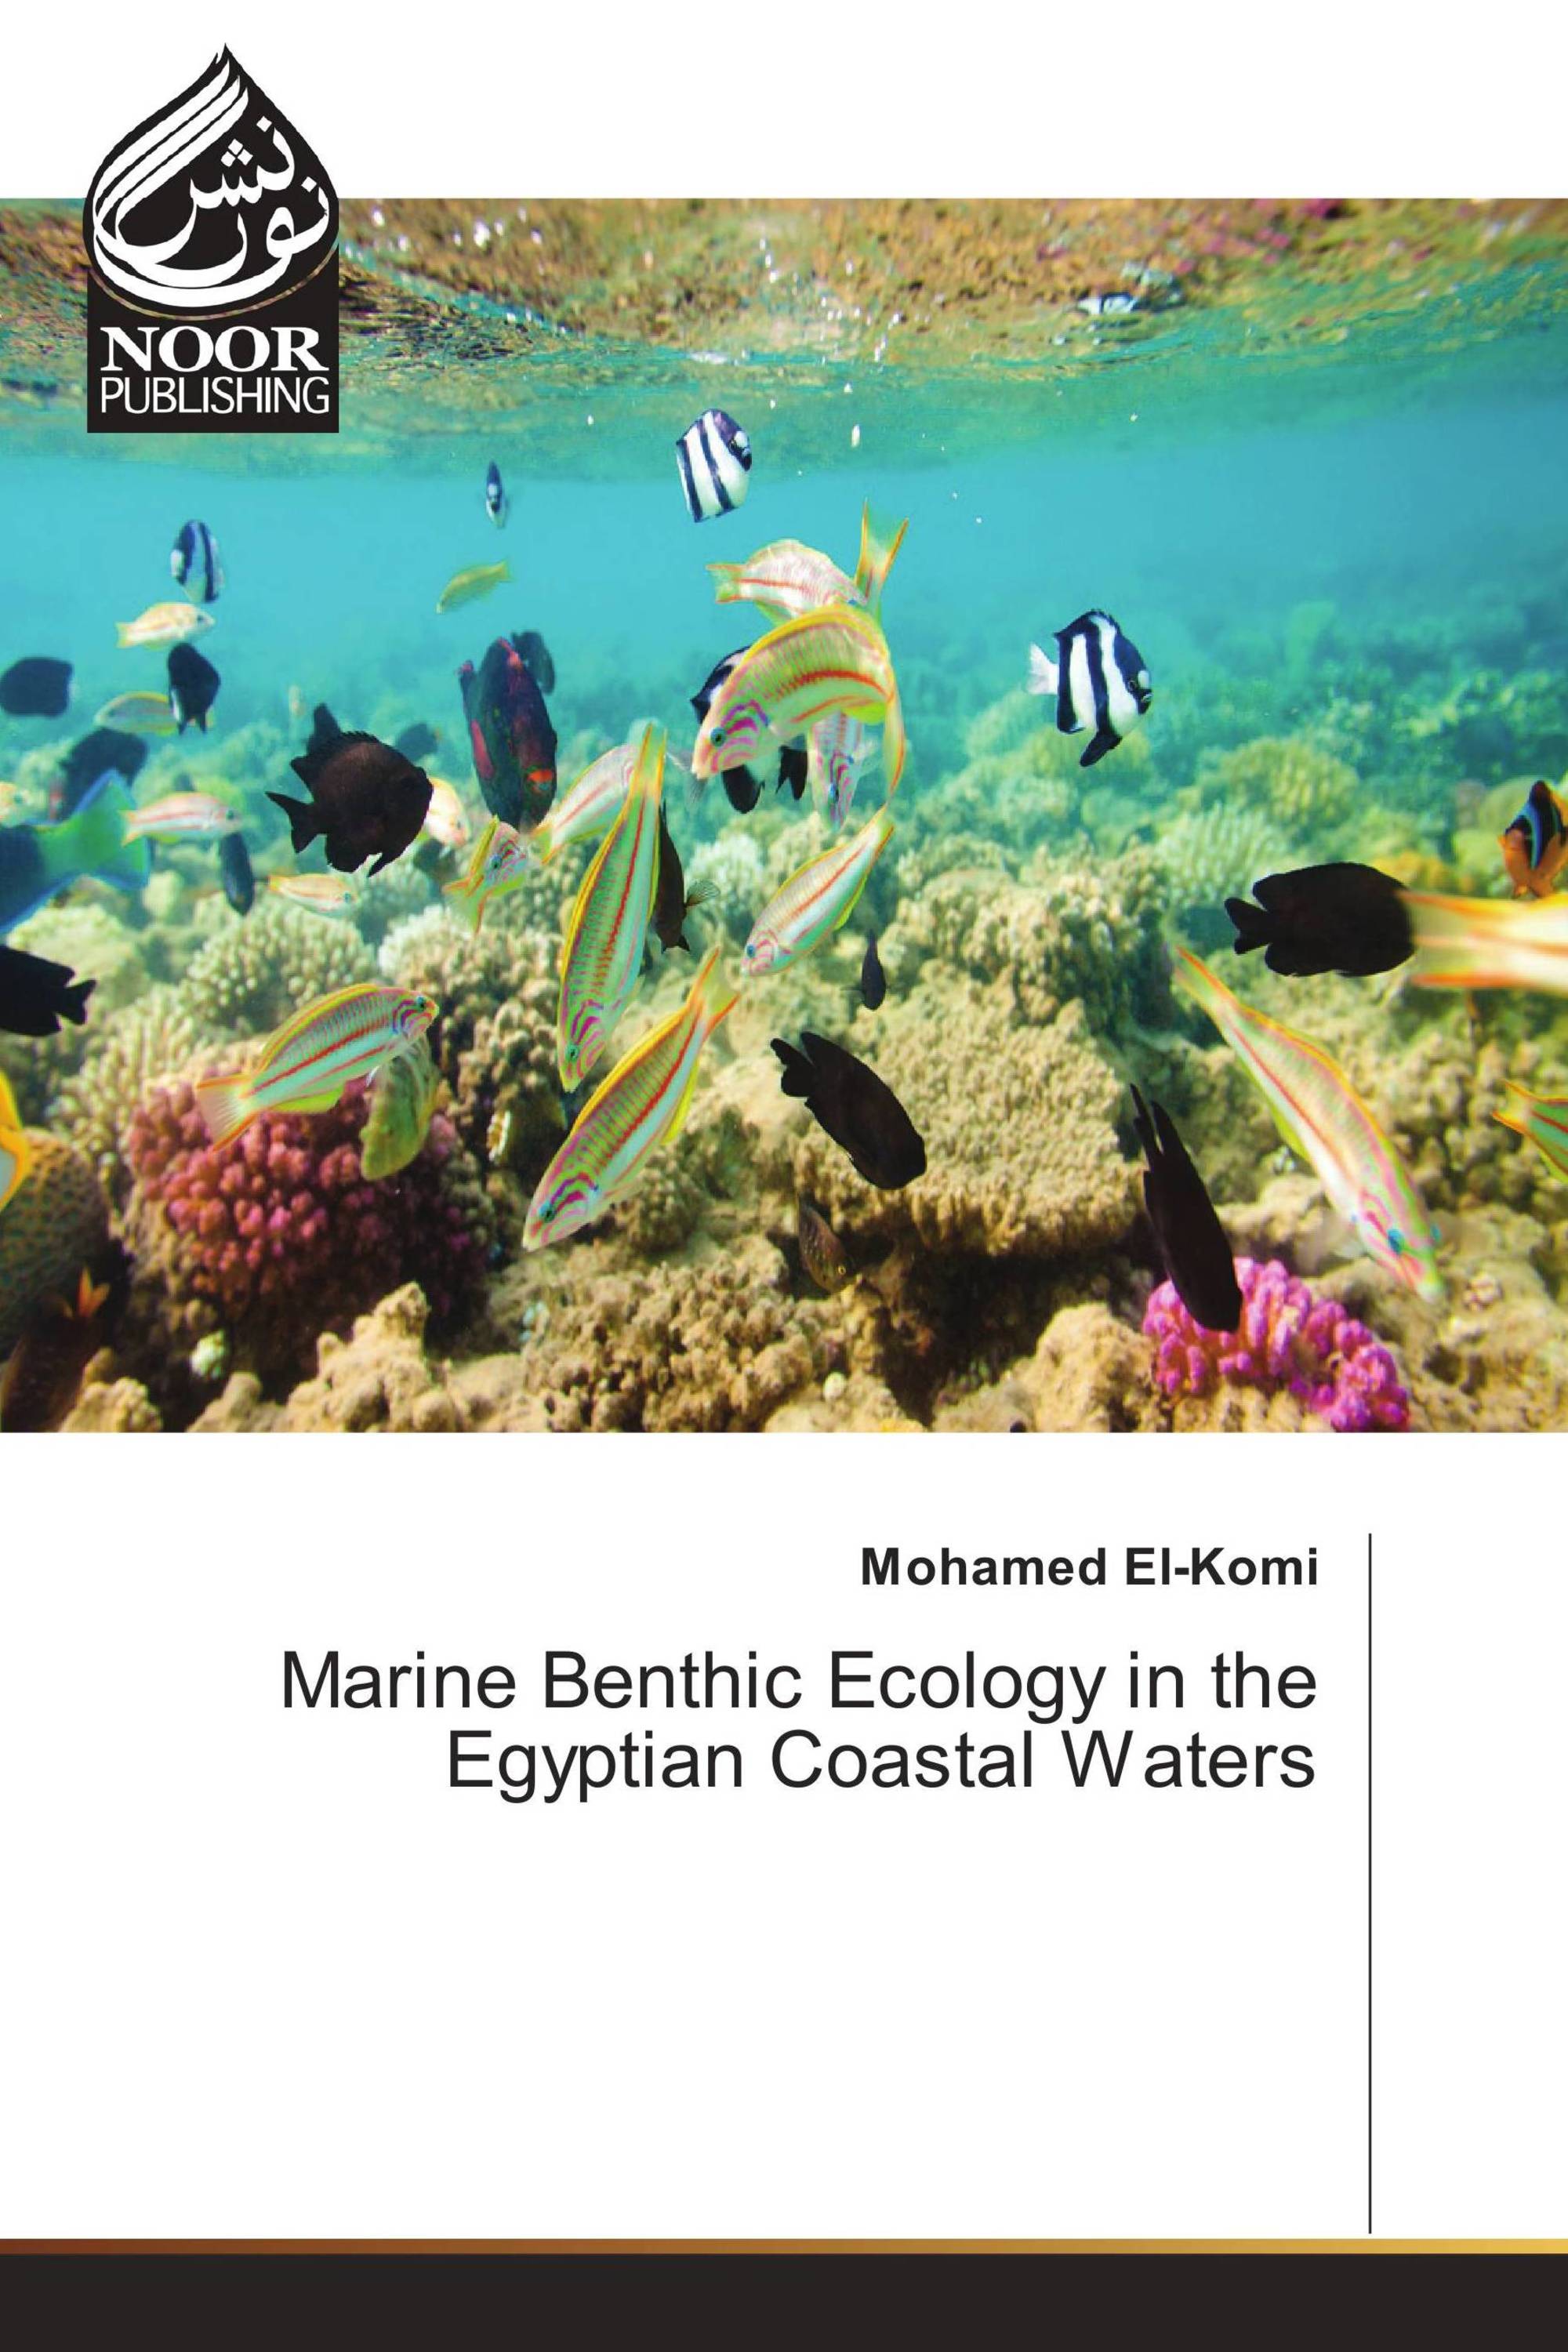 Marine Benthic Ecology in the Egyptian Coastal Waters